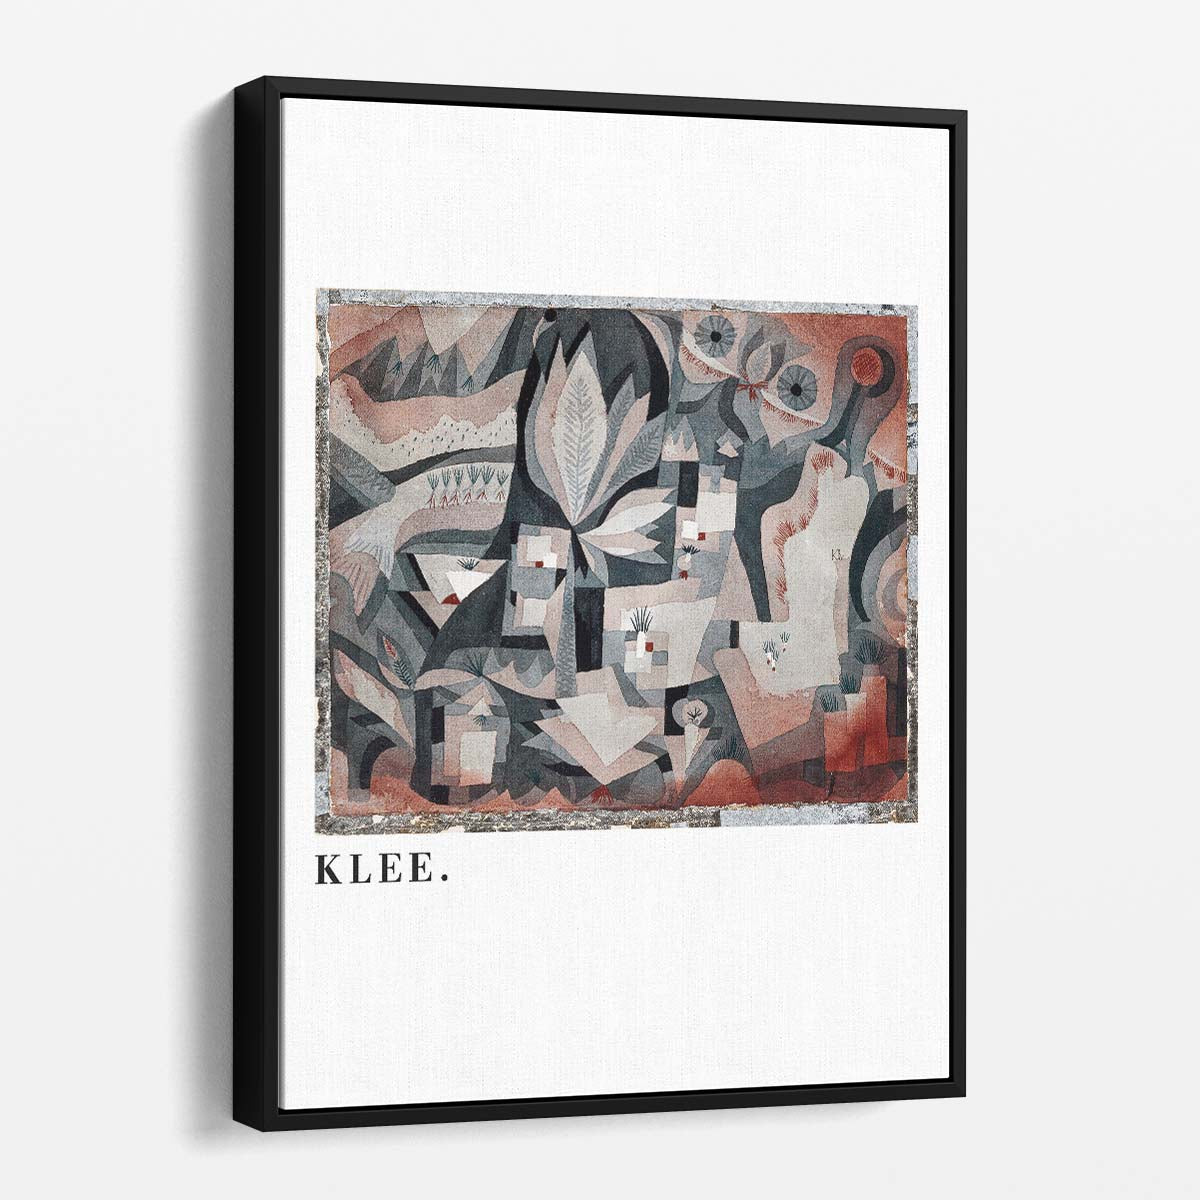 Paul Klee 1921 Abstract Garden Illustration, Modern Art Poster by Luxuriance Designs, made in USA